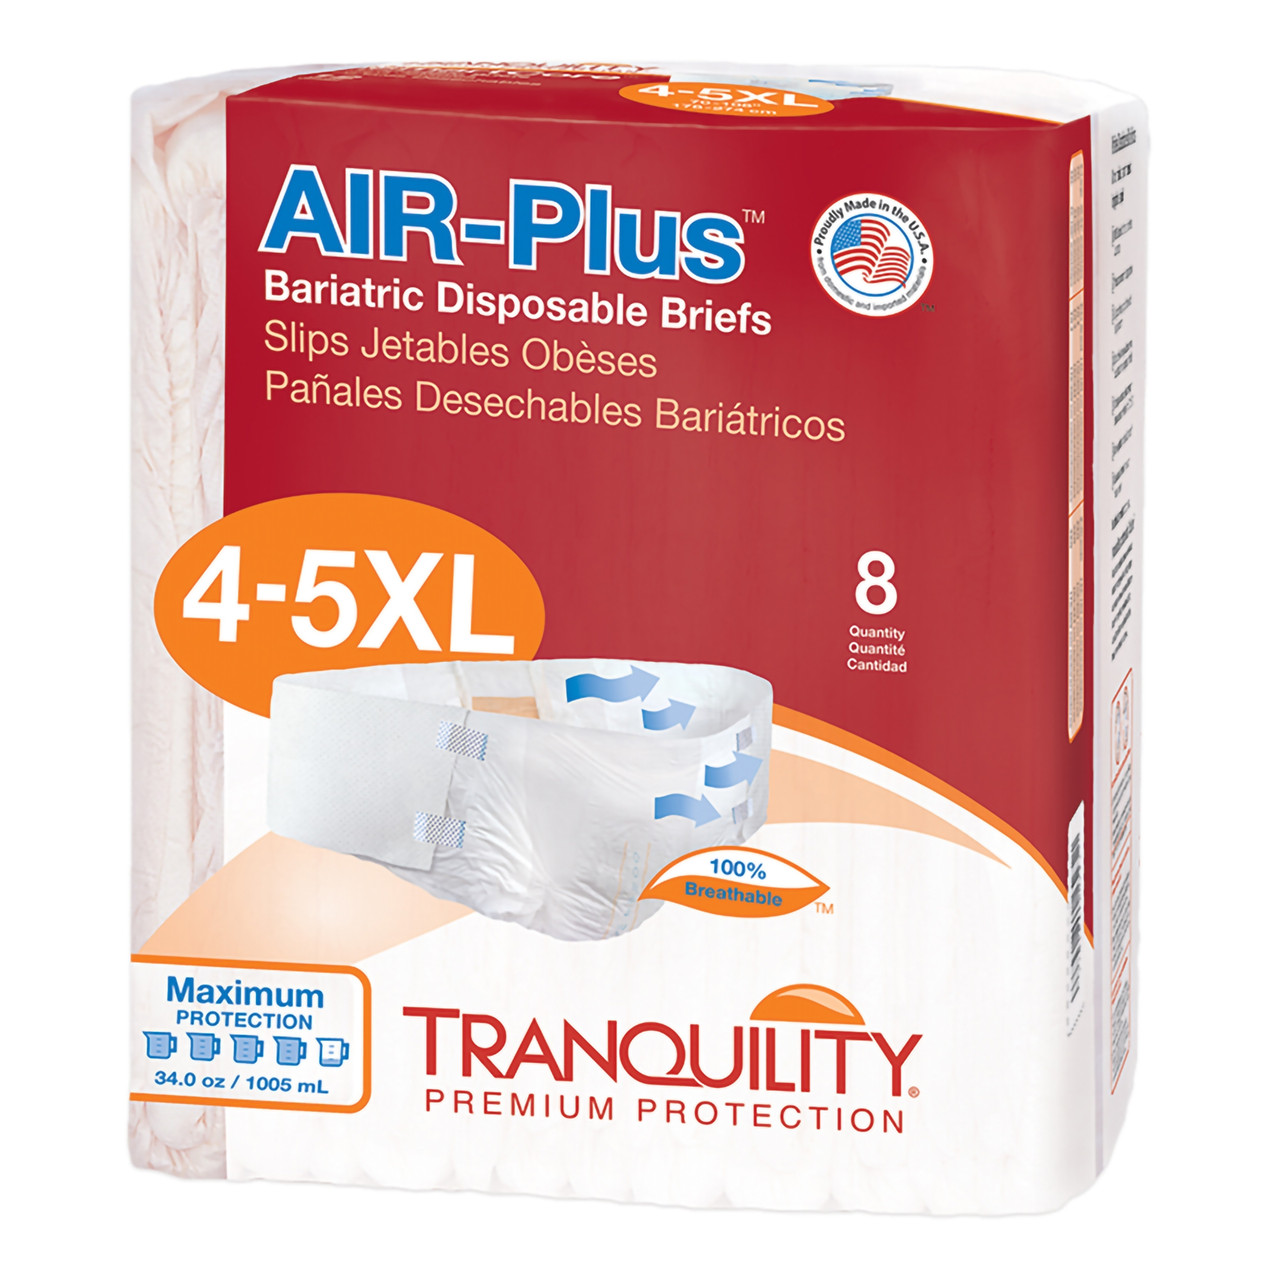 Tranquility AIR-Plus Bariatric Incontinence Briefs, Max Absorbency